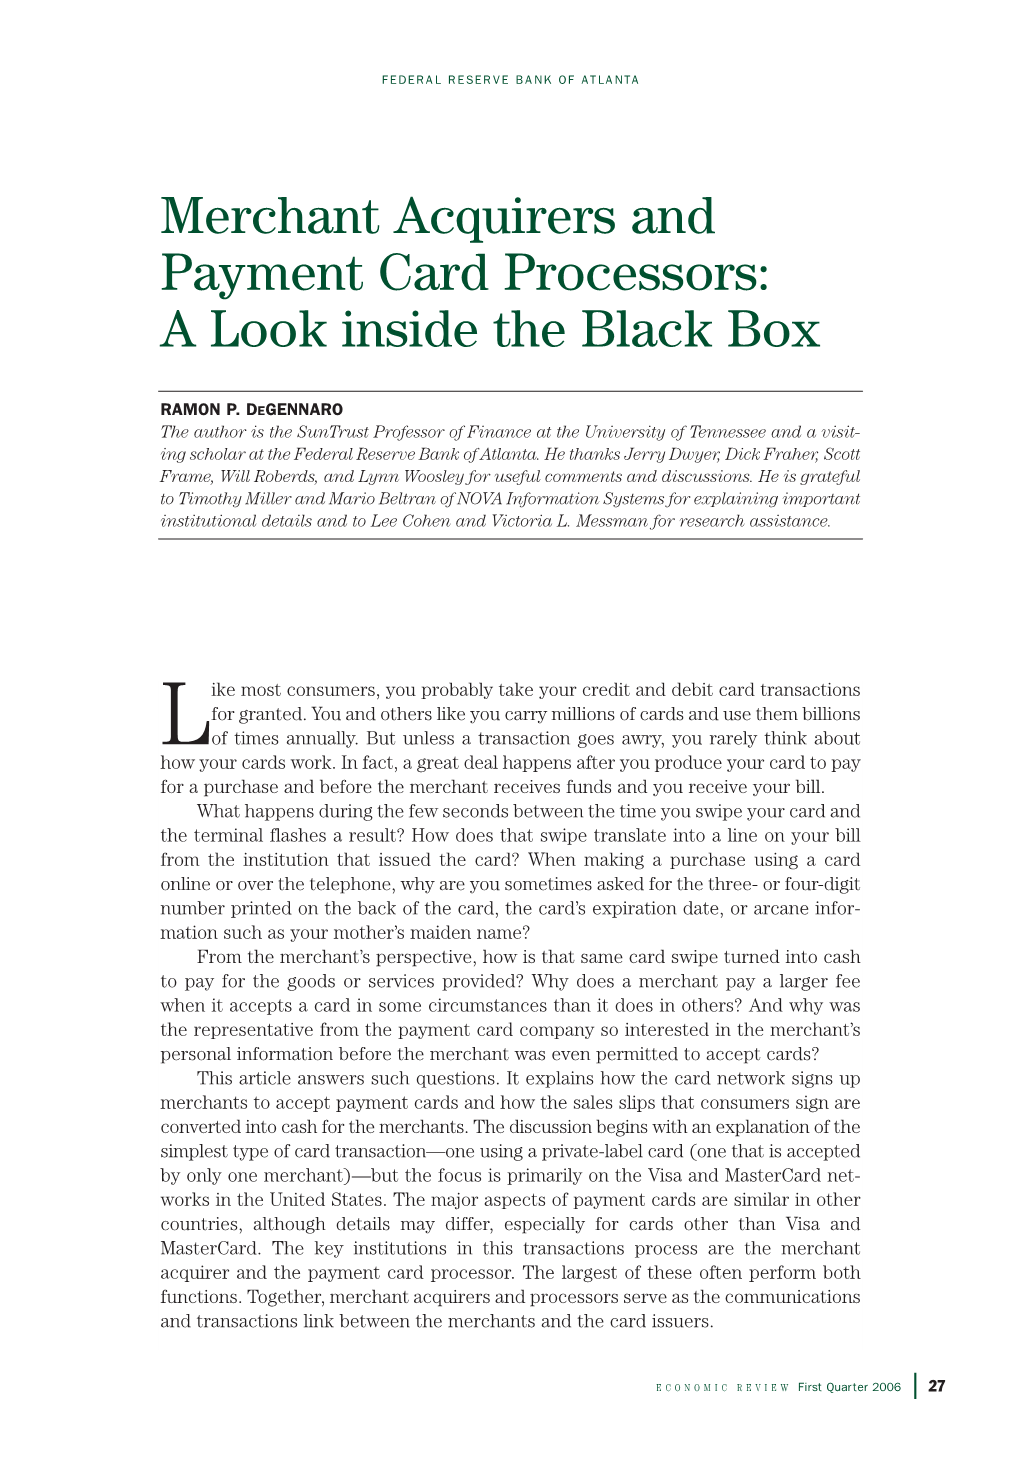 Merchant Acquirers and Payment Card Processors: a Look Inside the Black Box